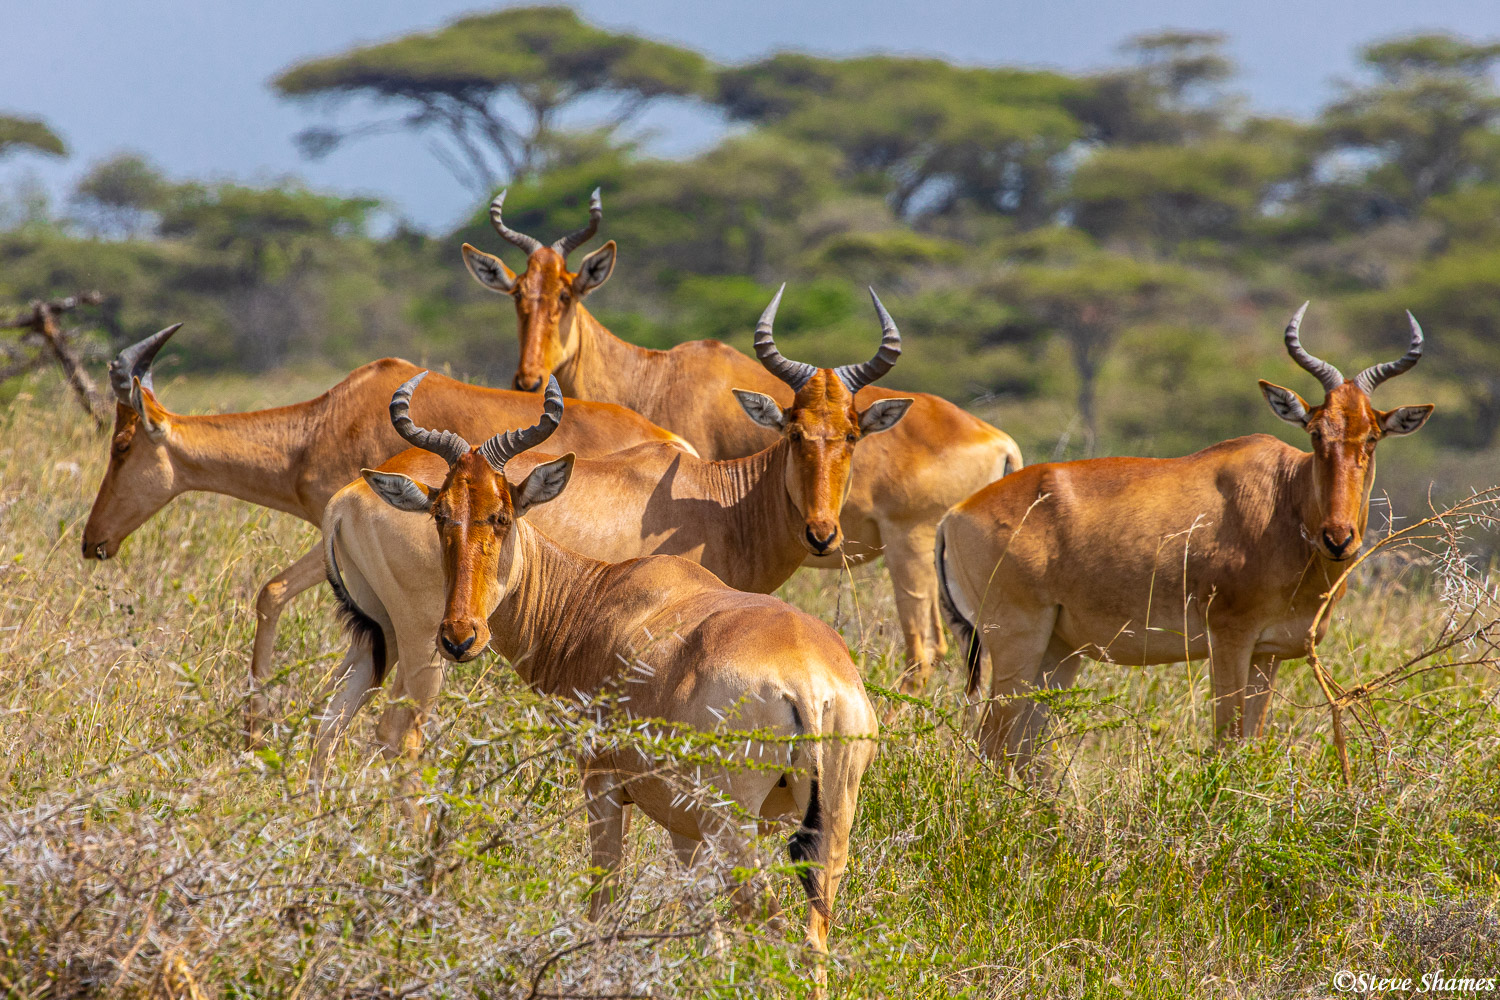 A small herd of hartebeest. I like the shape of their horns.